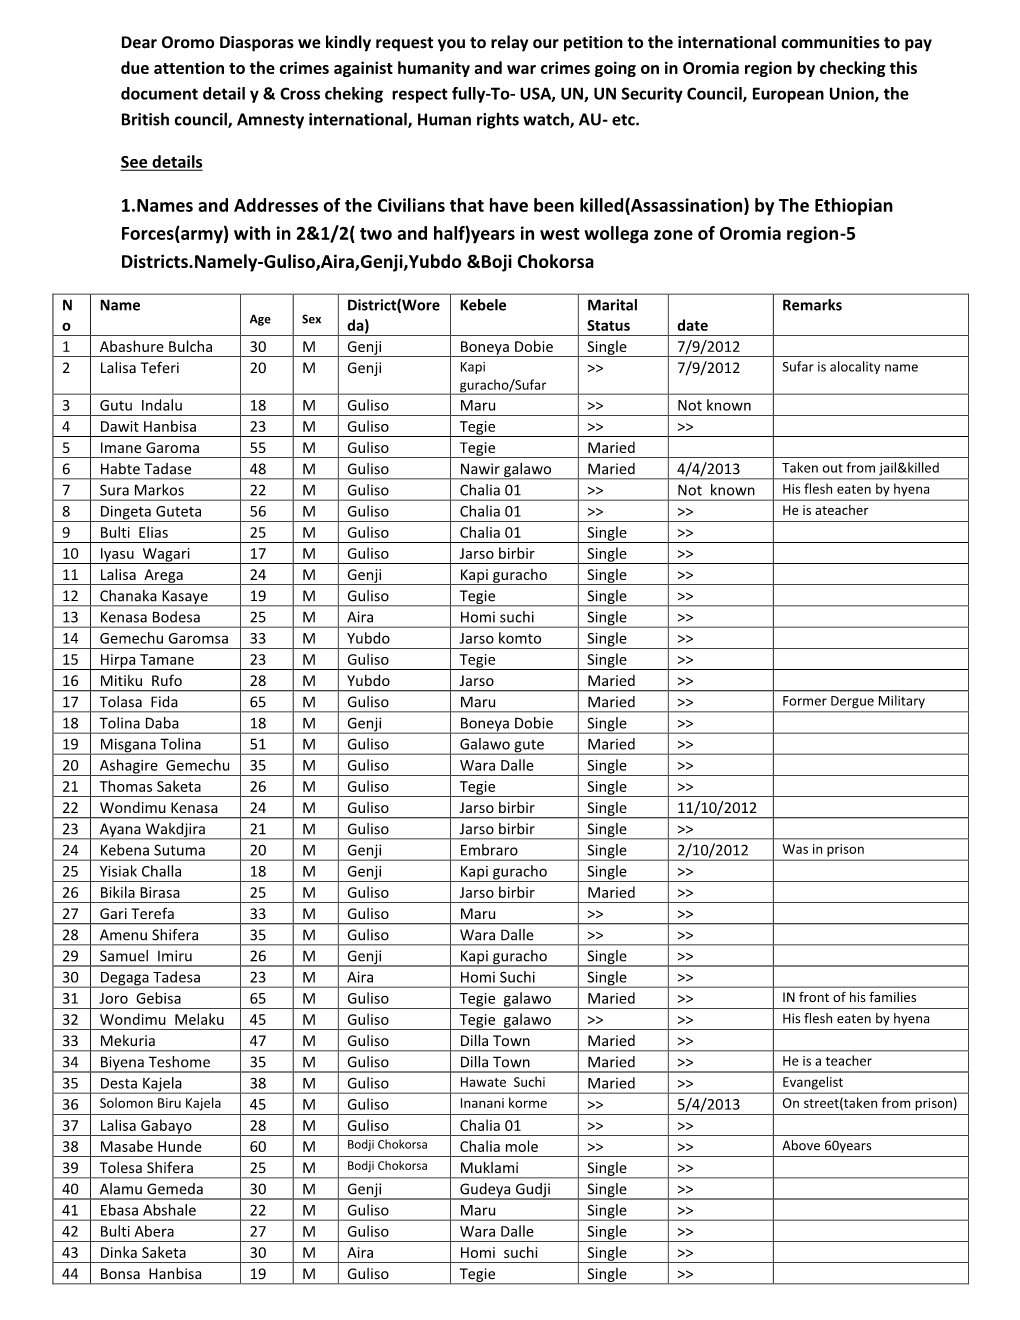 1.Names and Addresses of the Civilians That Have Been Killed(Assassination) by the Ethiopian Forces(Army) with in 2&1/2(